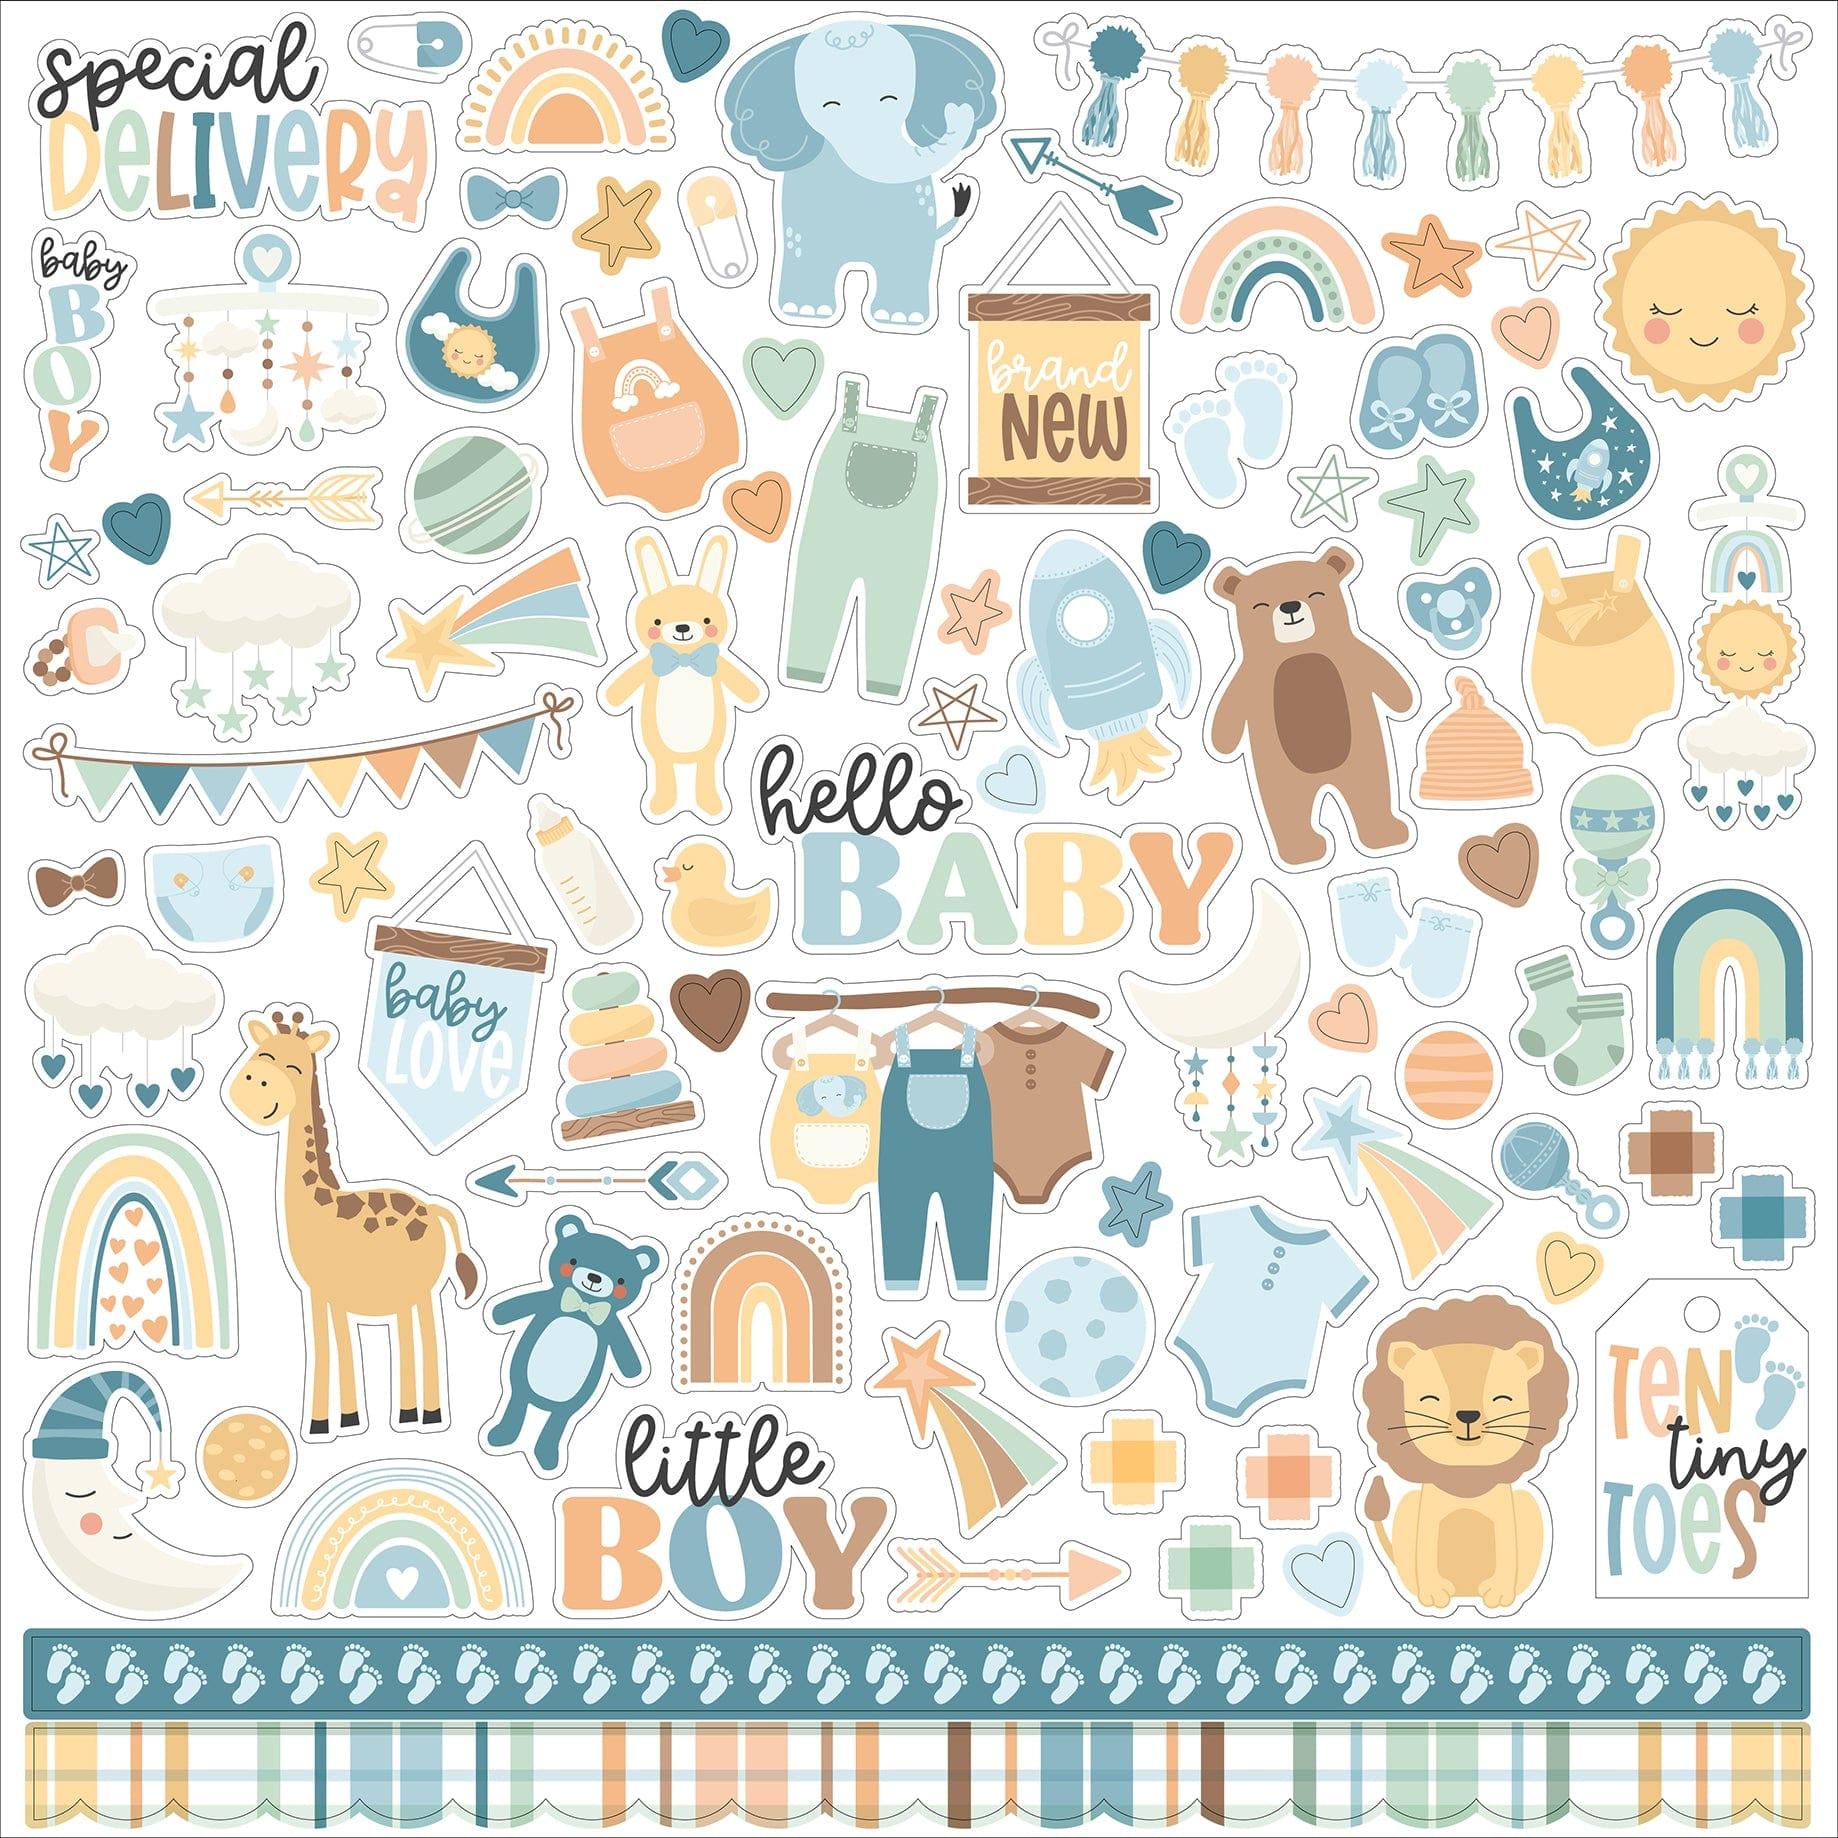 Our Baby Boy Collection 12 x 12 Scrapbook Sticker Sheet by Echo Park Paper - Scrapbook Supply Companies